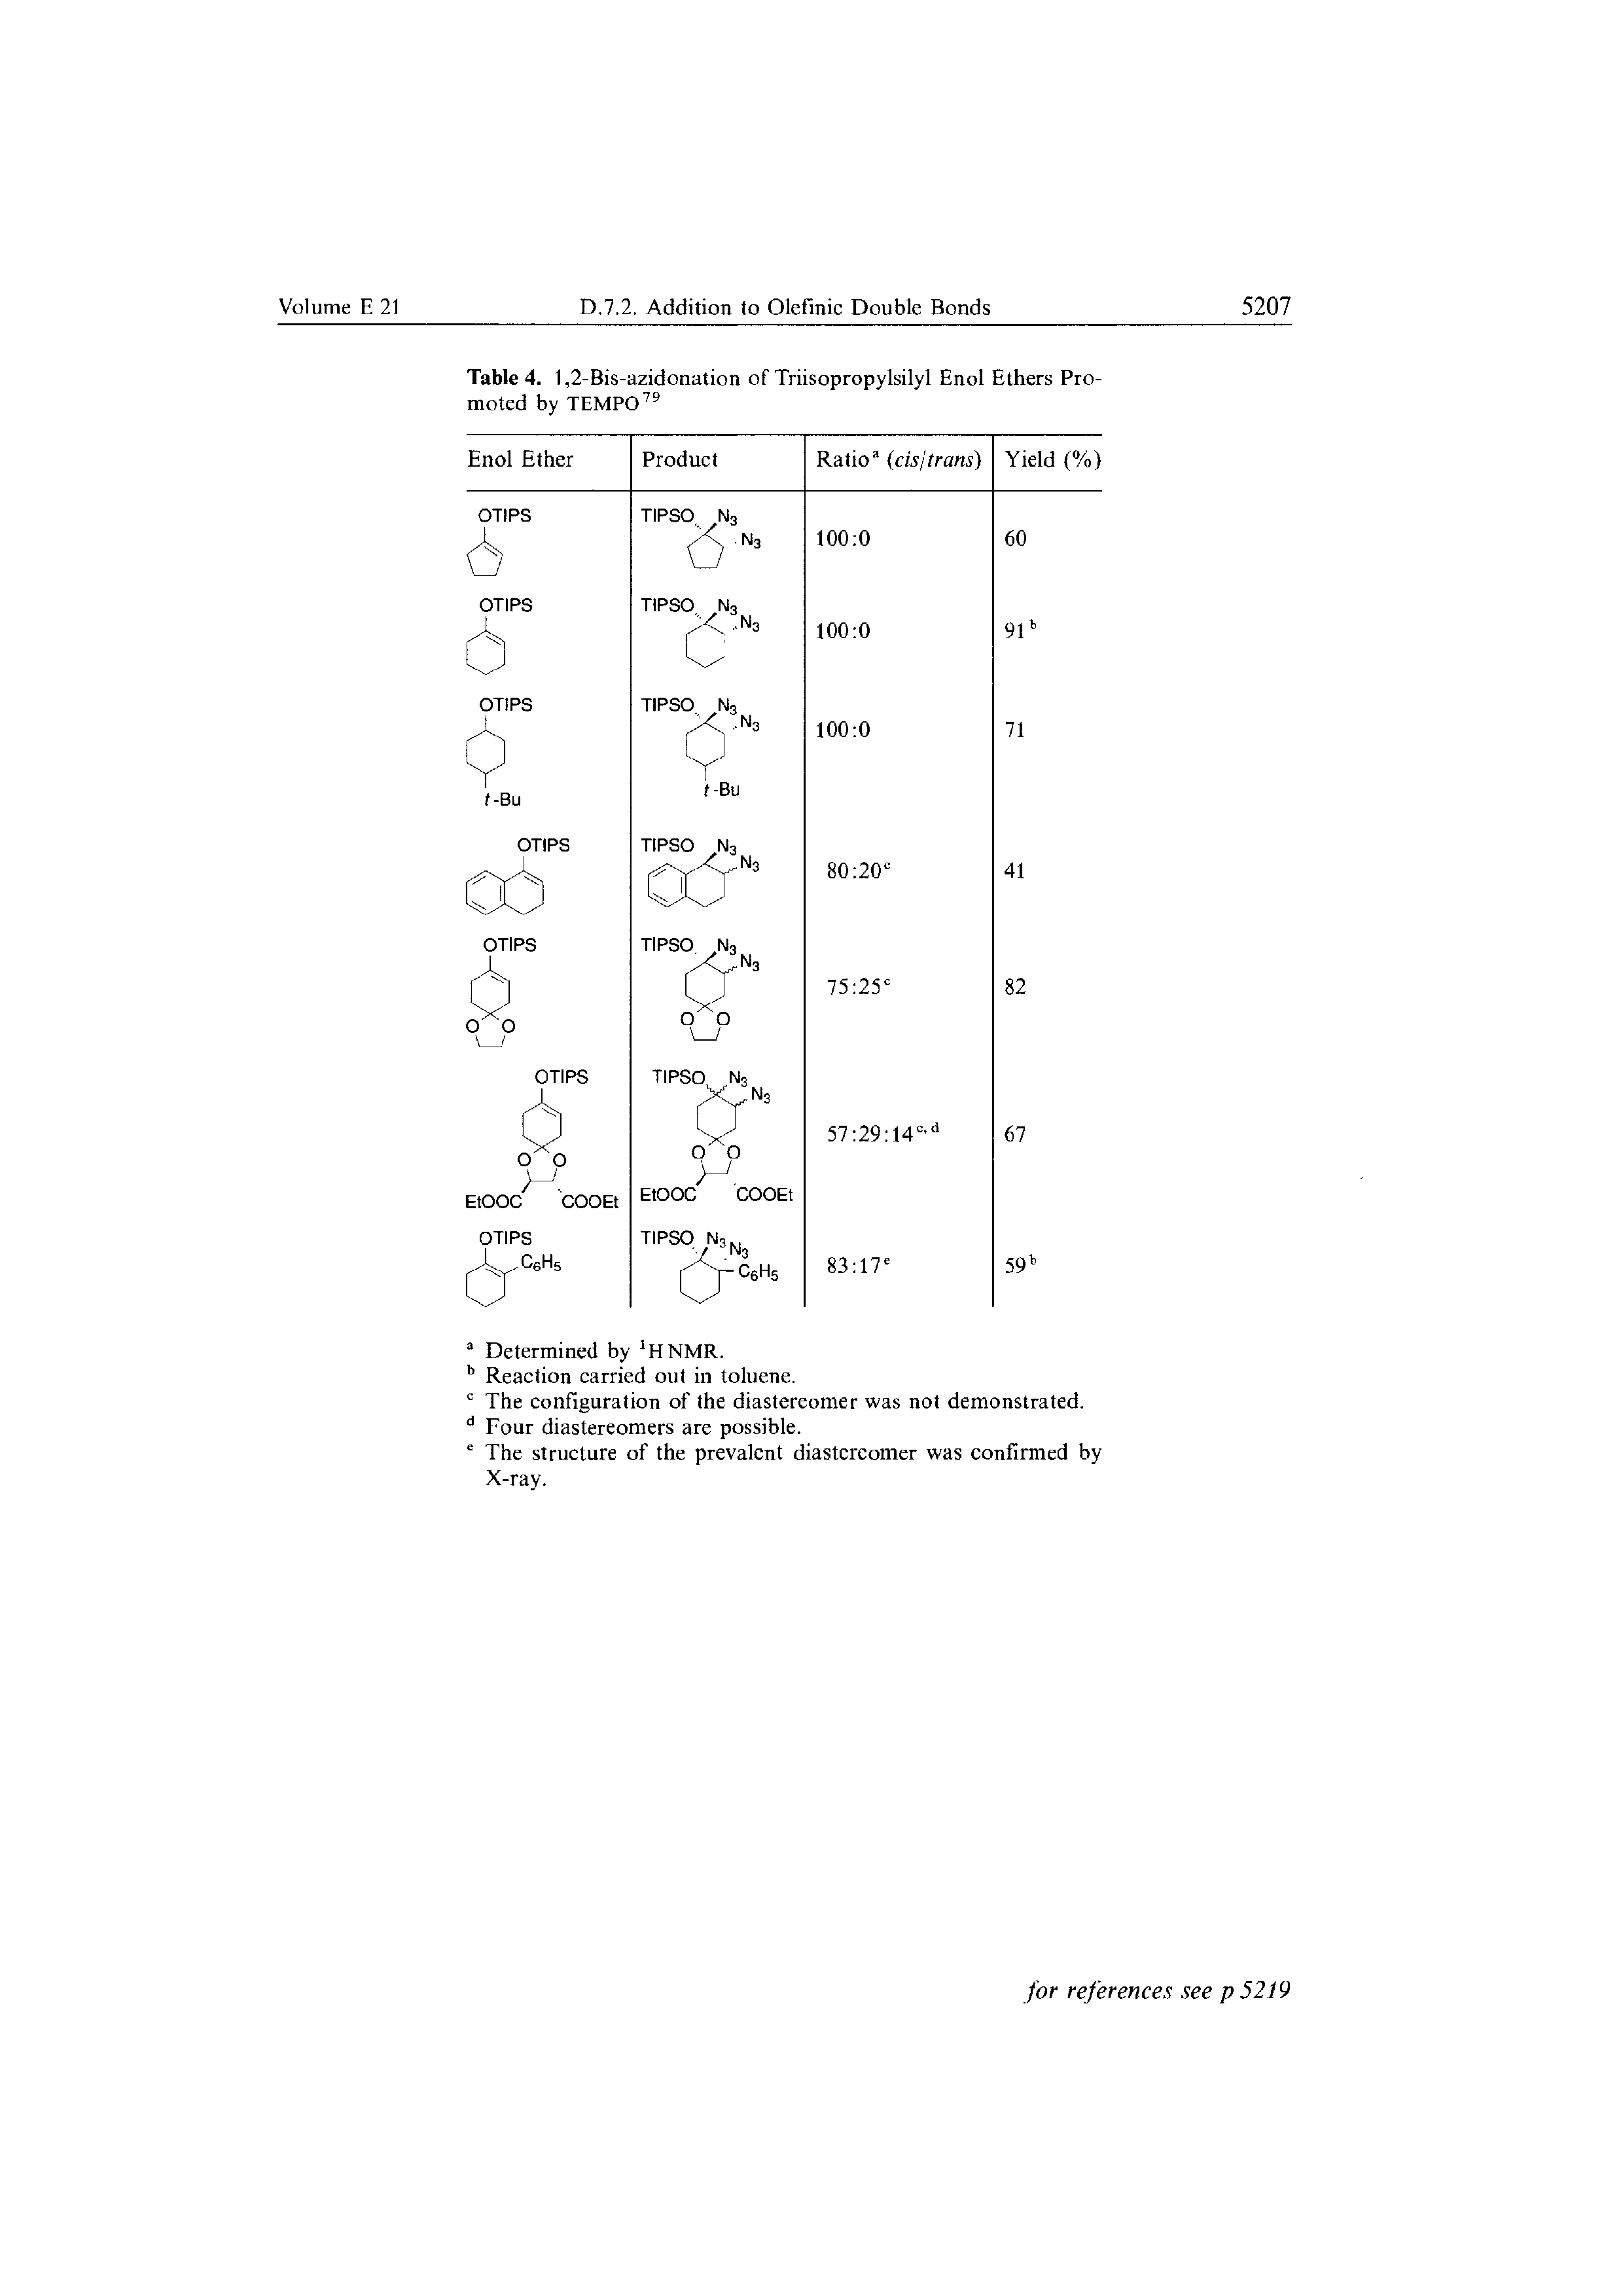 Table 4. 1,2-Bis-azidonation of Triisopropylsilyl Enol Ethers Promoted by TEMPO79...